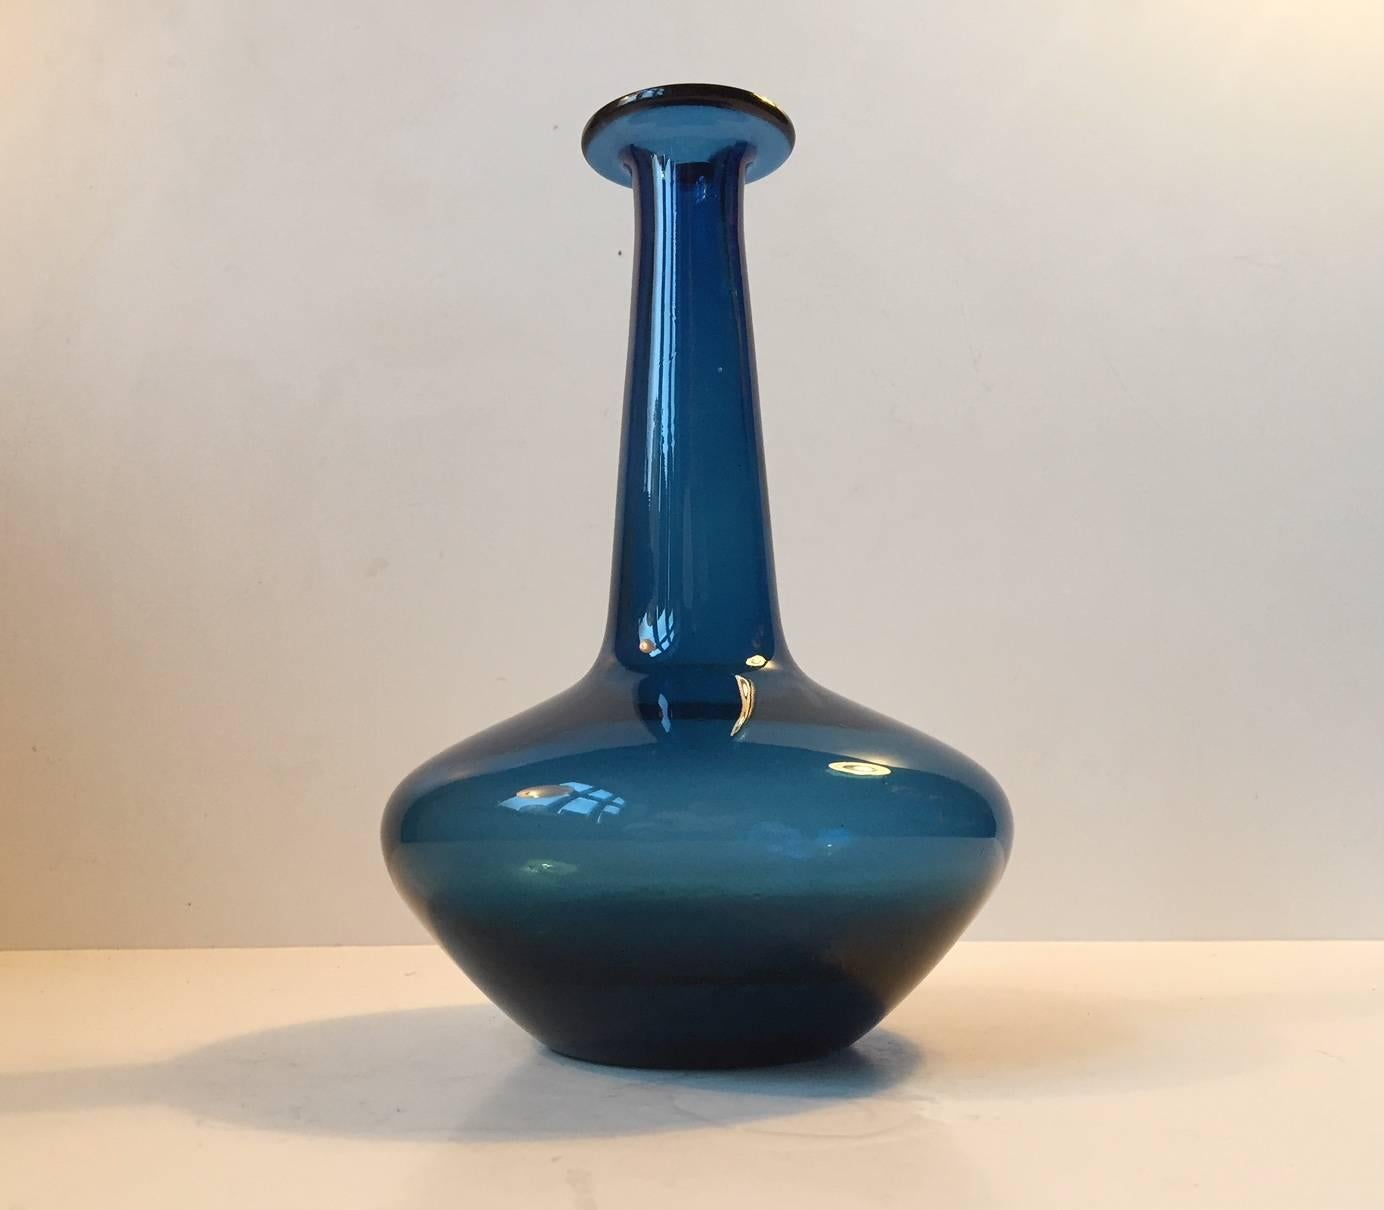 Organically shaped blue glass vase designed by Jacob E. Bang (Arne Bang's younger brother) and manufactured by Fyns Glasværk / Holmegaard in Denmark in the 1960s. The name Capri refers to the distinctive blue color.